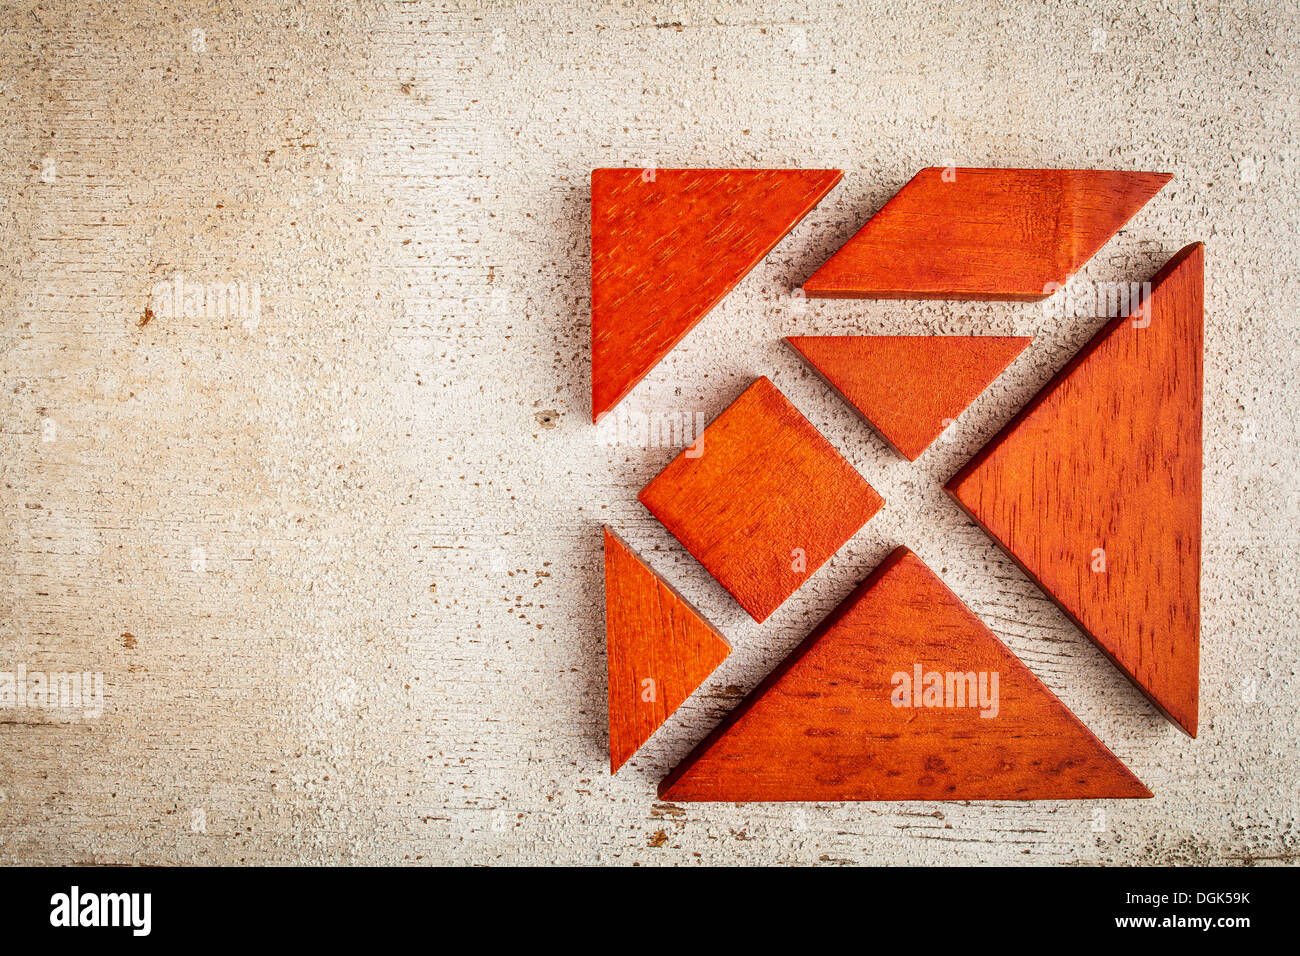 seven tangram wooden pieces, a traditional Chinese puzzle game, rough white painted barn wood background Stock Photo